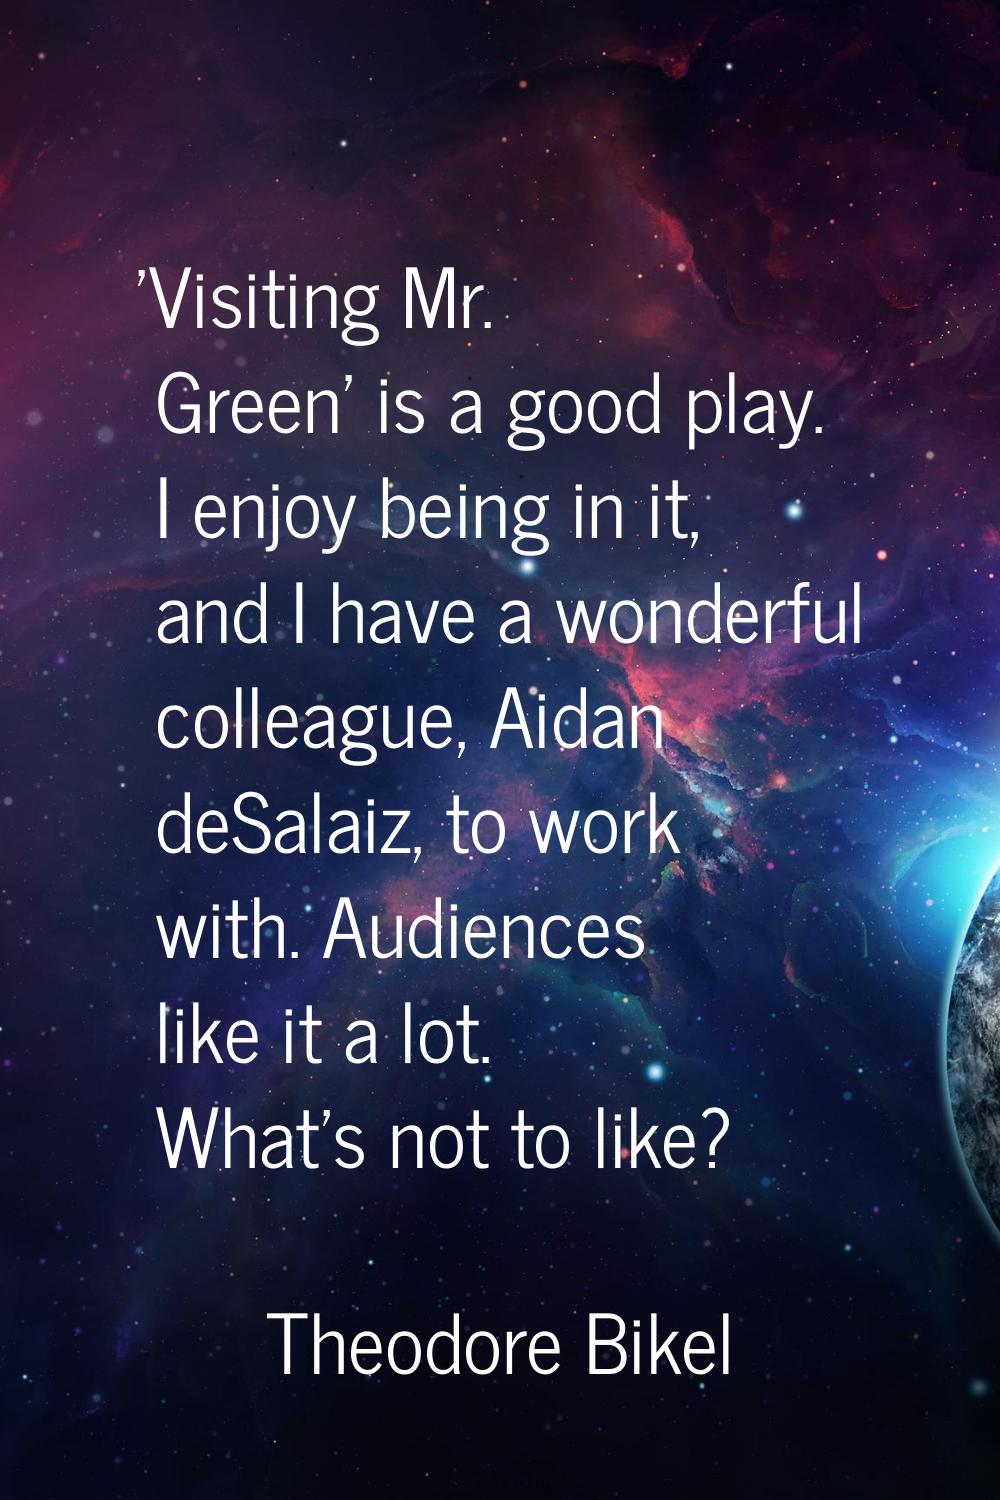 'Visiting Mr. Green' is a good play. I enjoy being in it, and I have a wonderful colleague, Aidan d